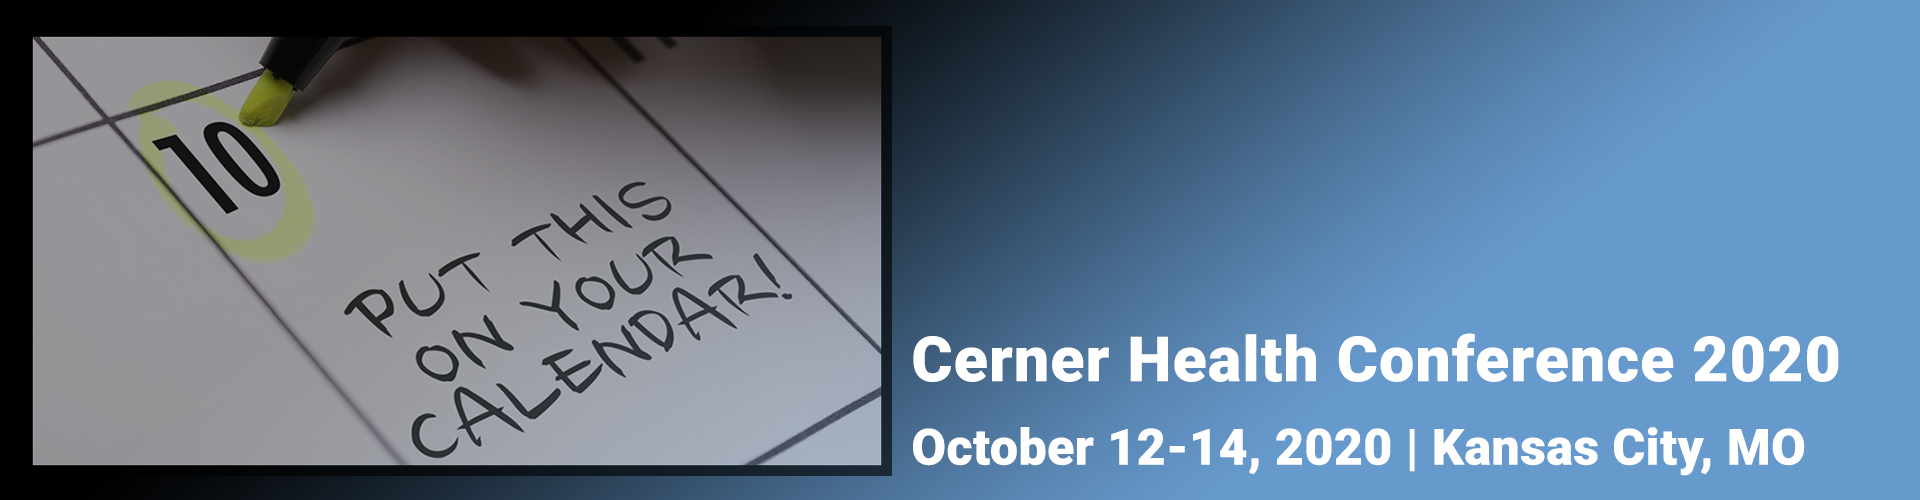 Find Quadax at the 2020 Cerner Health Conference